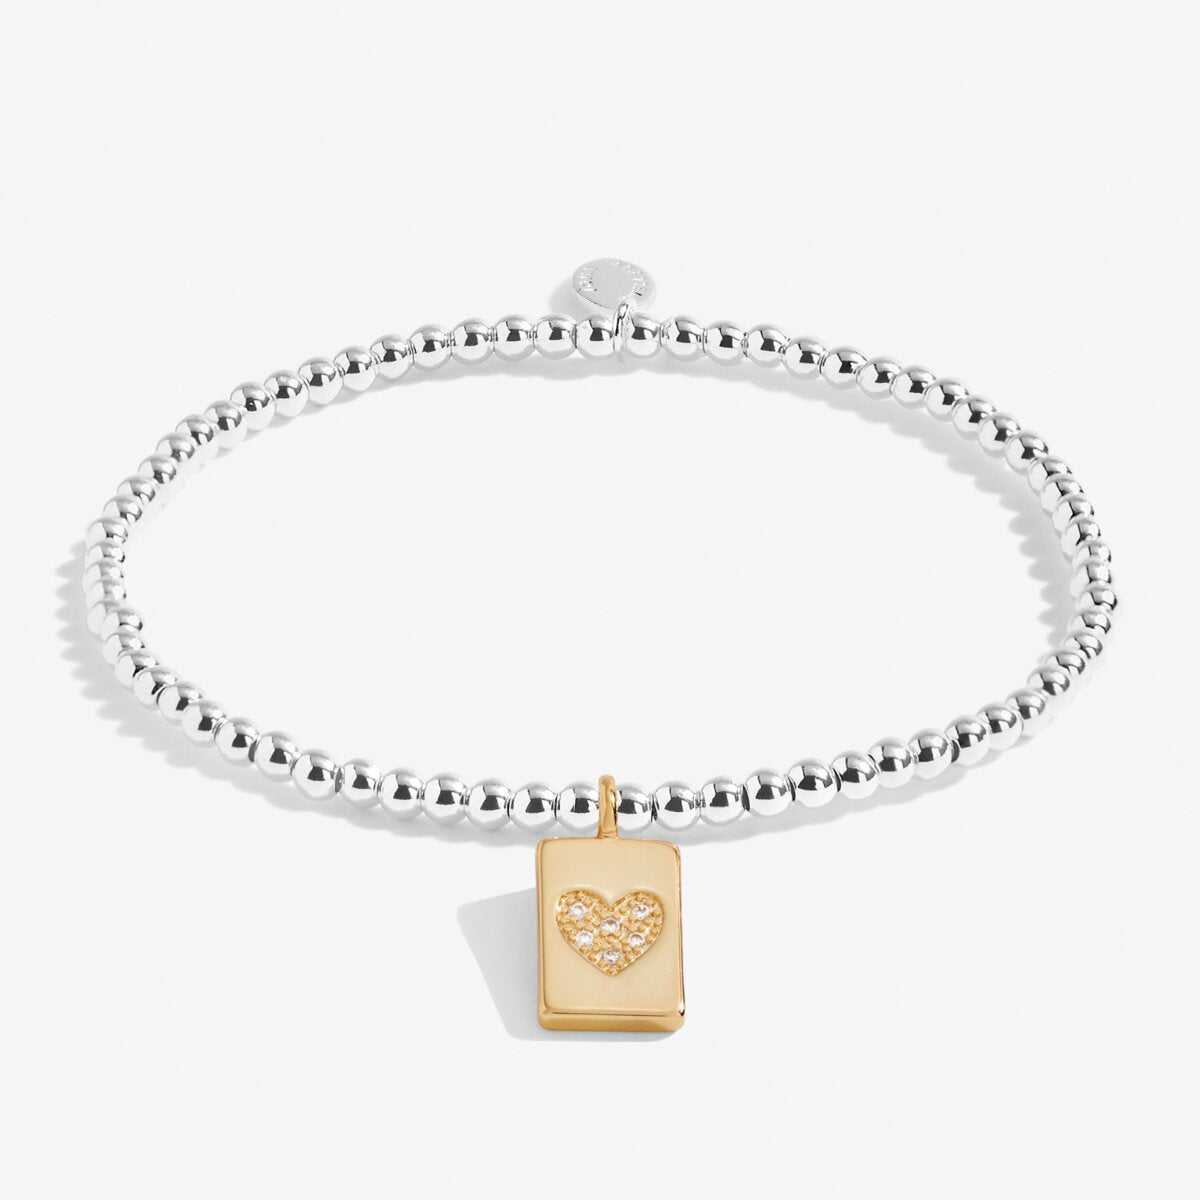 Joma Jewellery - A little So loved, so missed 6077